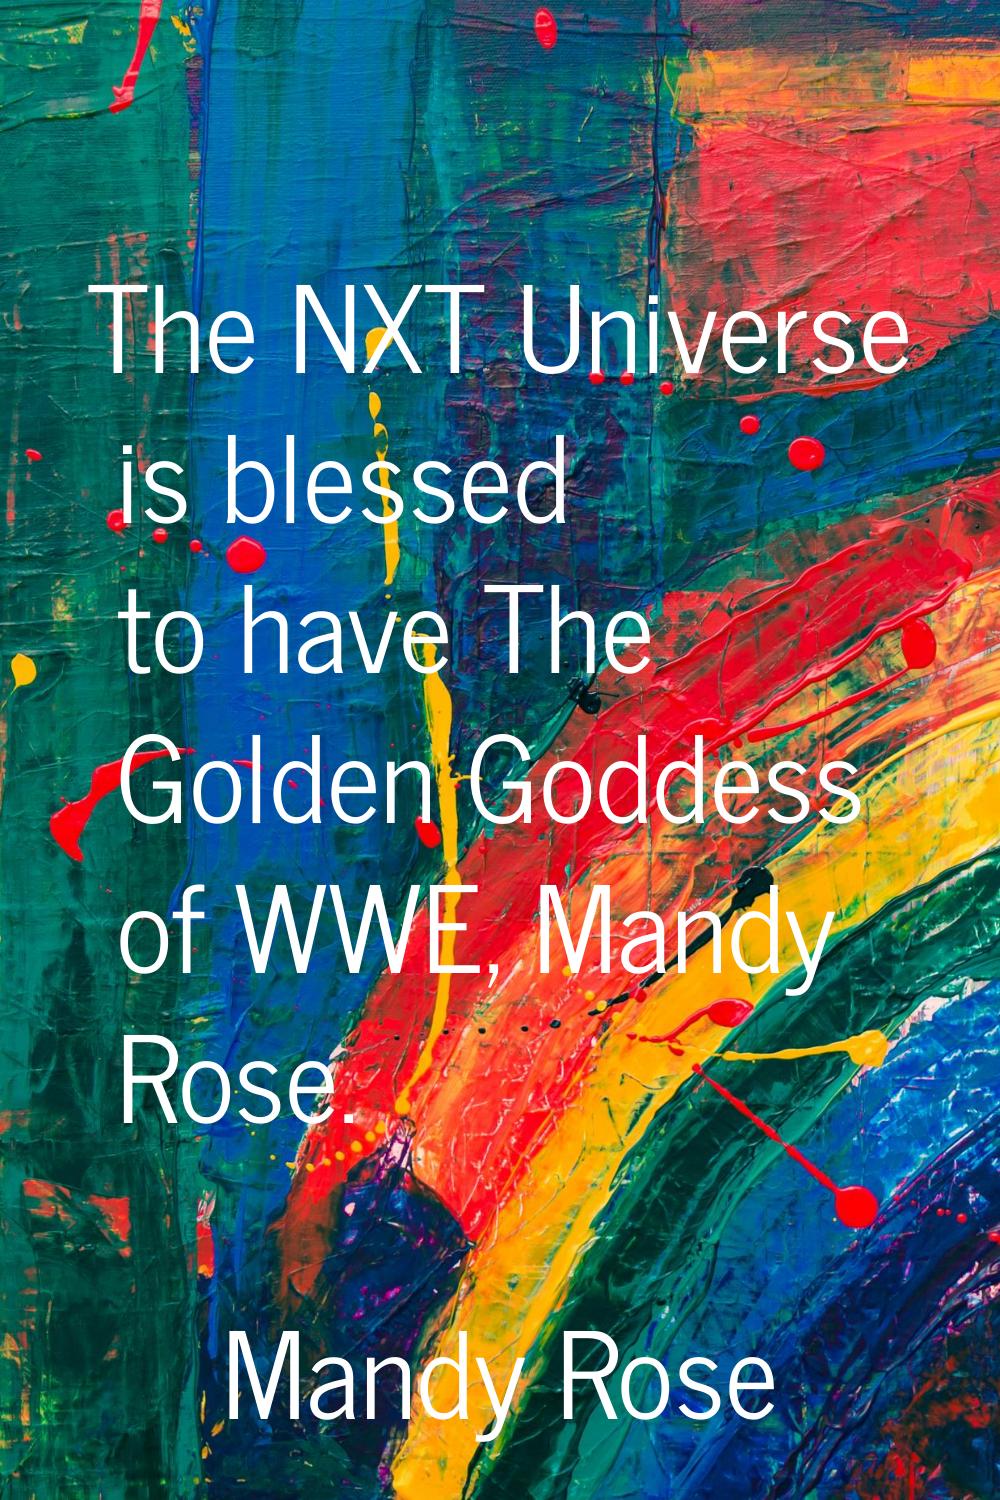 The NXT Universe is blessed to have The Golden Goddess of WWE, Mandy Rose.